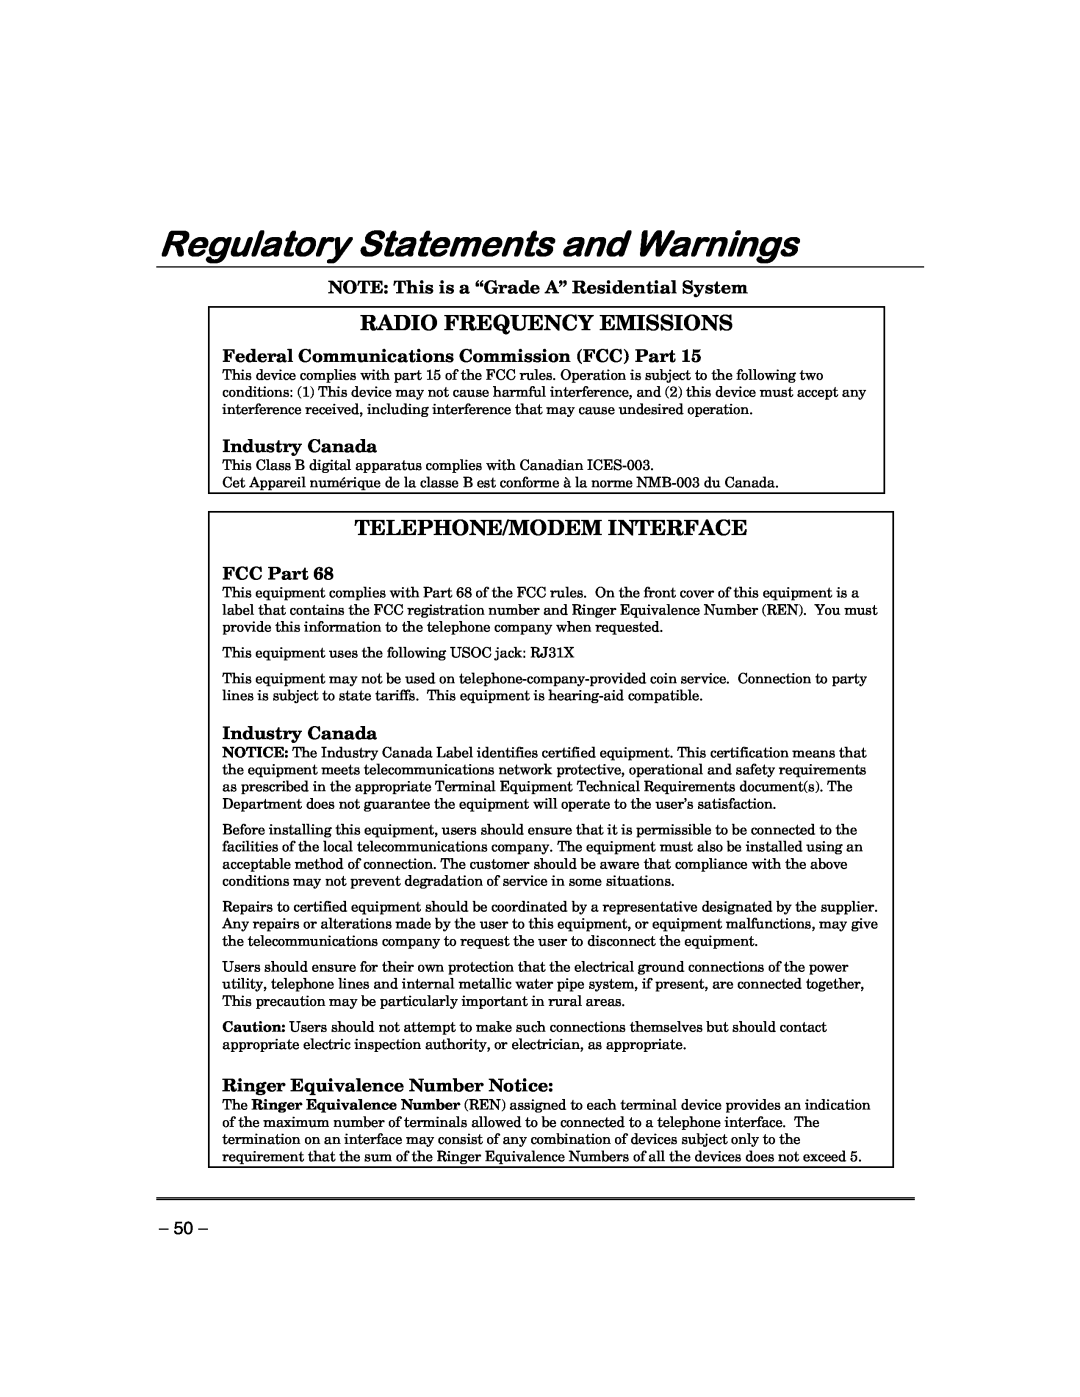 First Alert FA148CPSIA manual Regulatory Statements and Warnings, Radio Frequency Emissions, Telephone/Modem Interface 